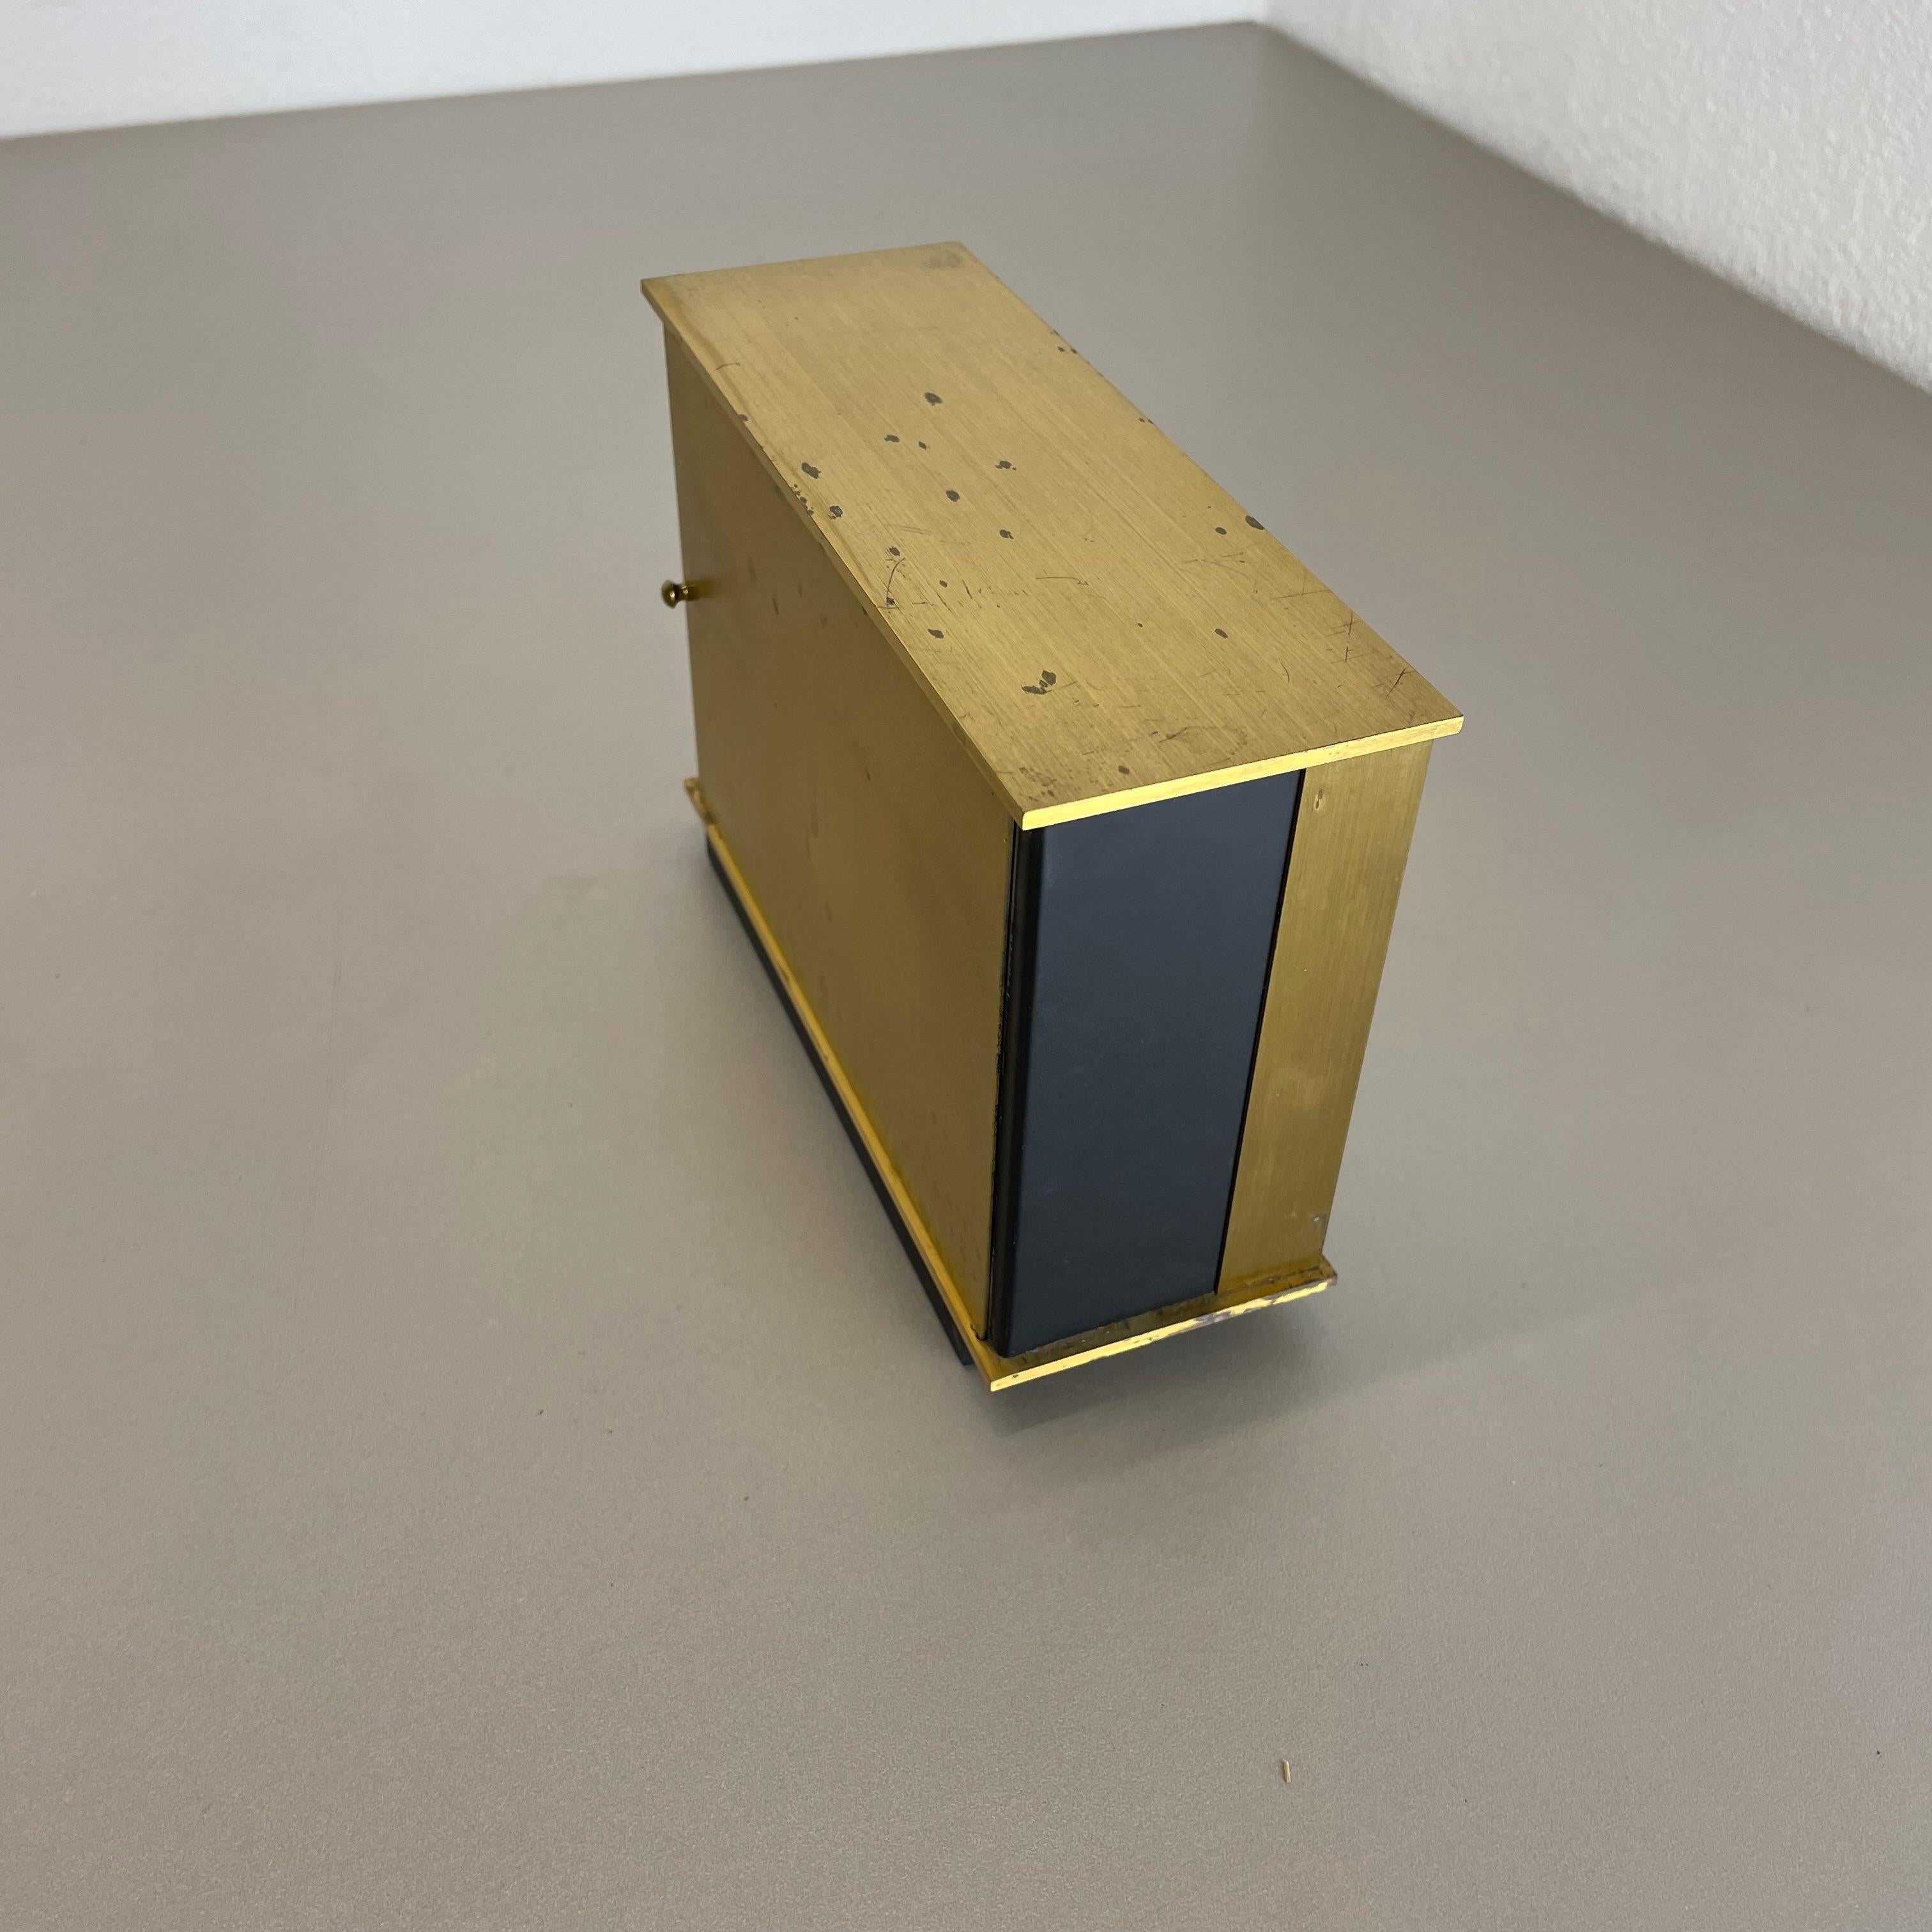 Vintage Modernist Metal Brass Table Clock by Diehl Dilectron, Germany 1960s For Sale 9